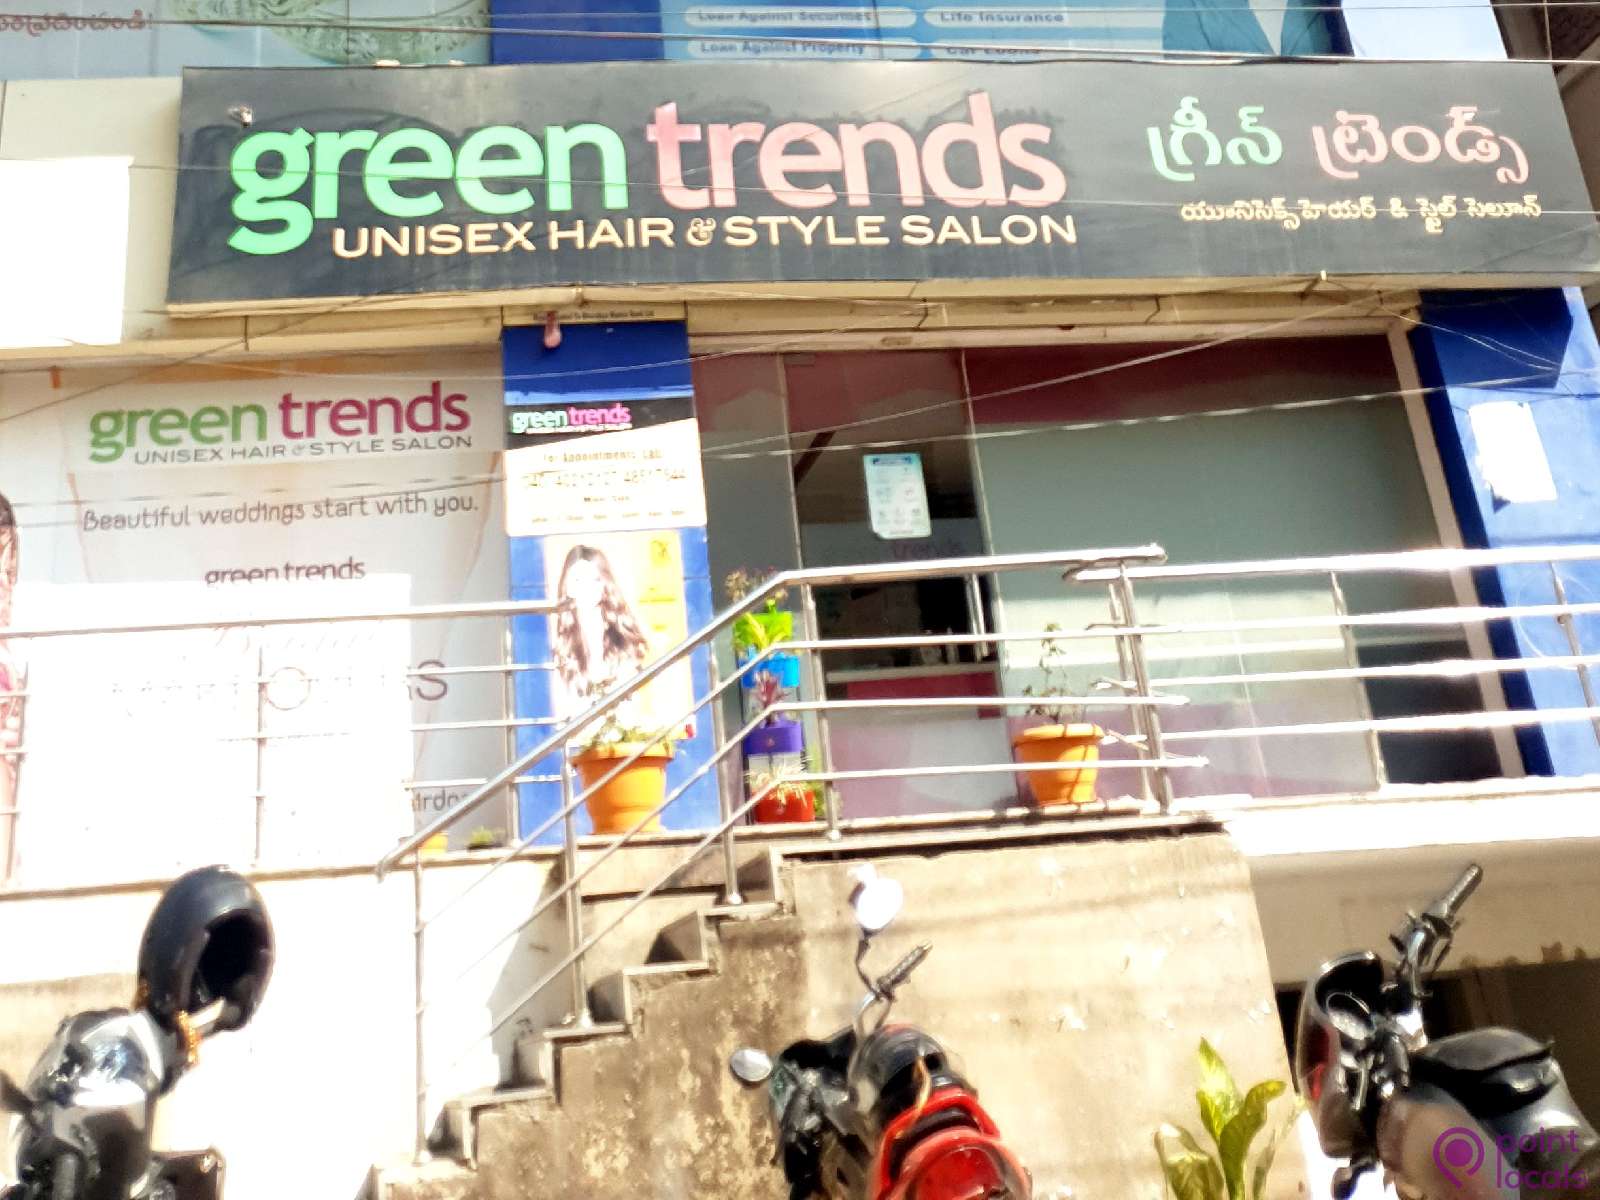 Green Trends Unisex Hair and Style Salon - Green Trends Salon in  Hyderabad,Telangana | Pointlocals